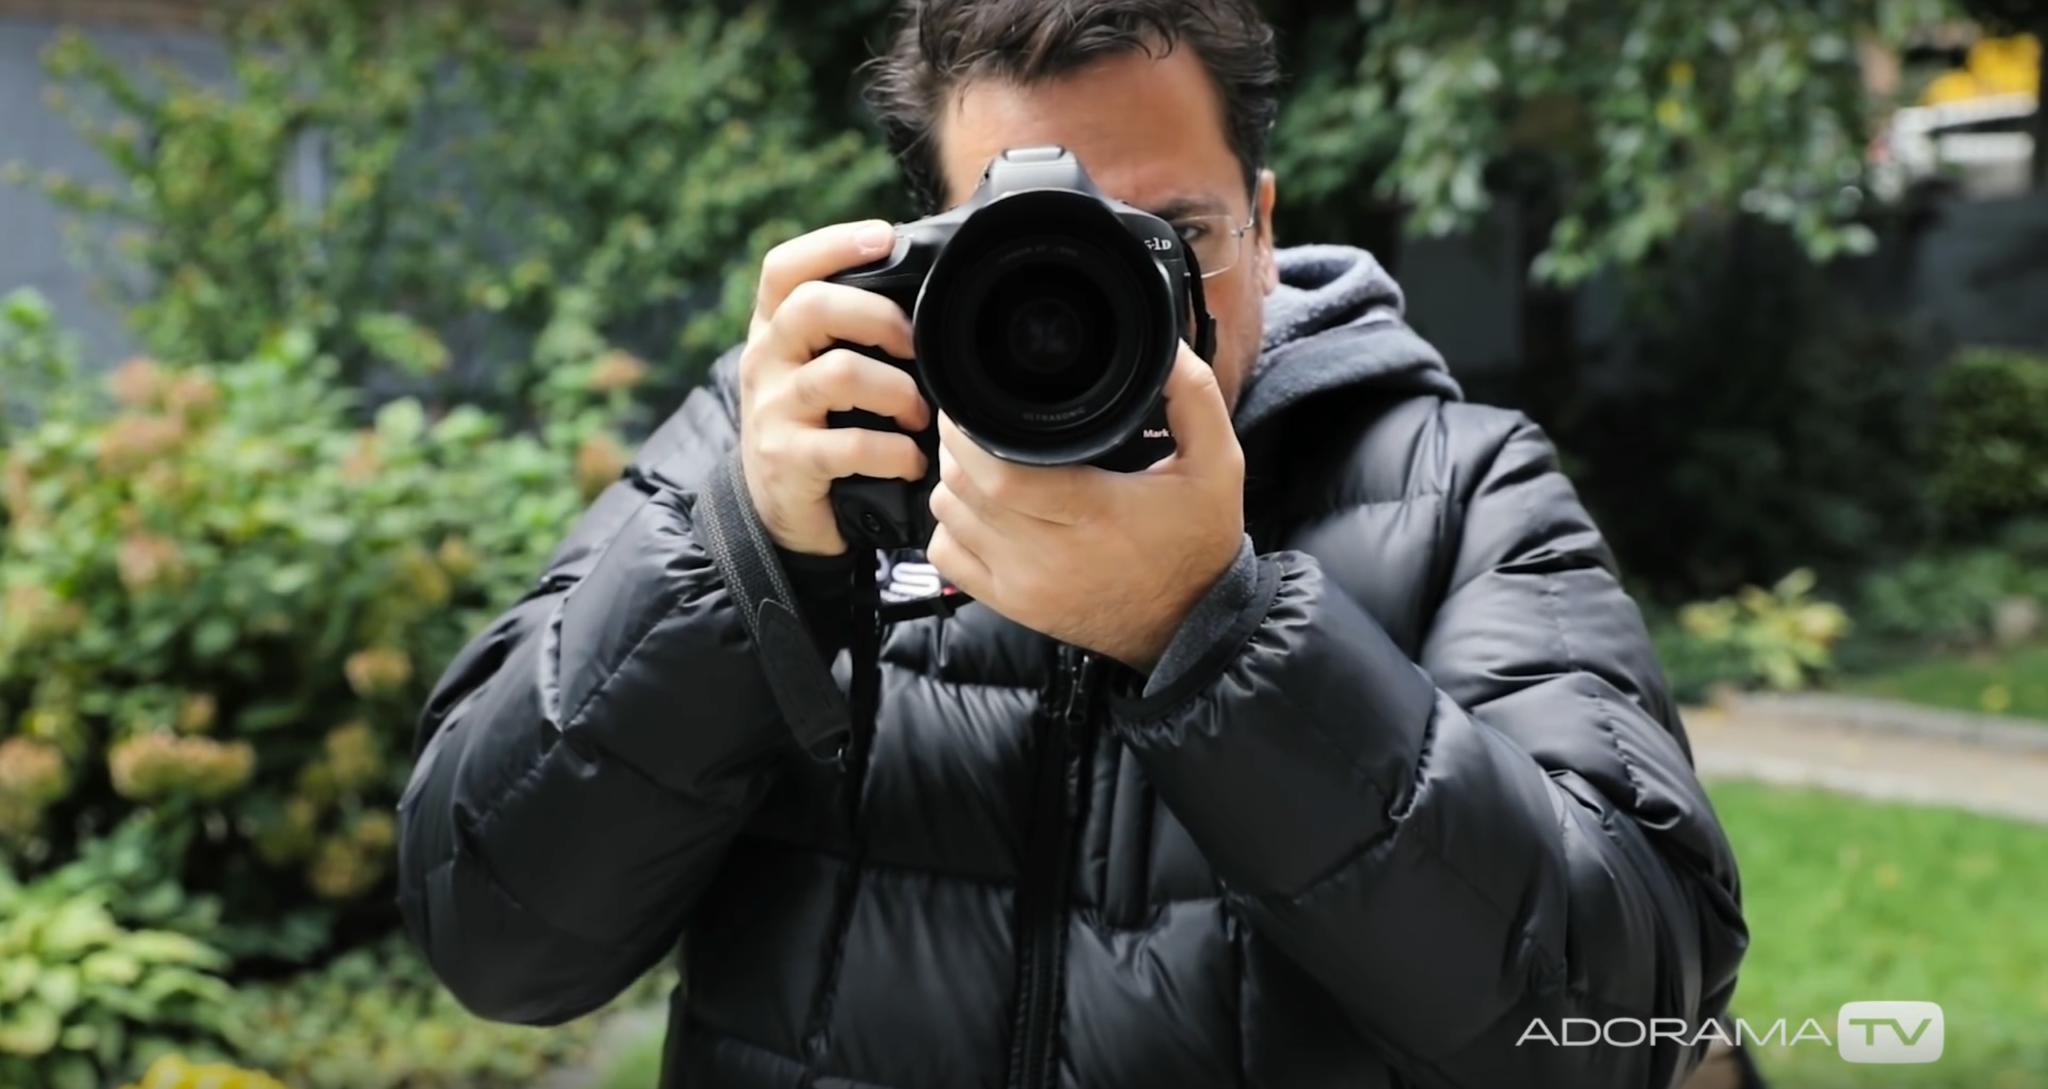 Learn How To Keep Your Camera Stable and Avoid Camera Shake with David Bergman